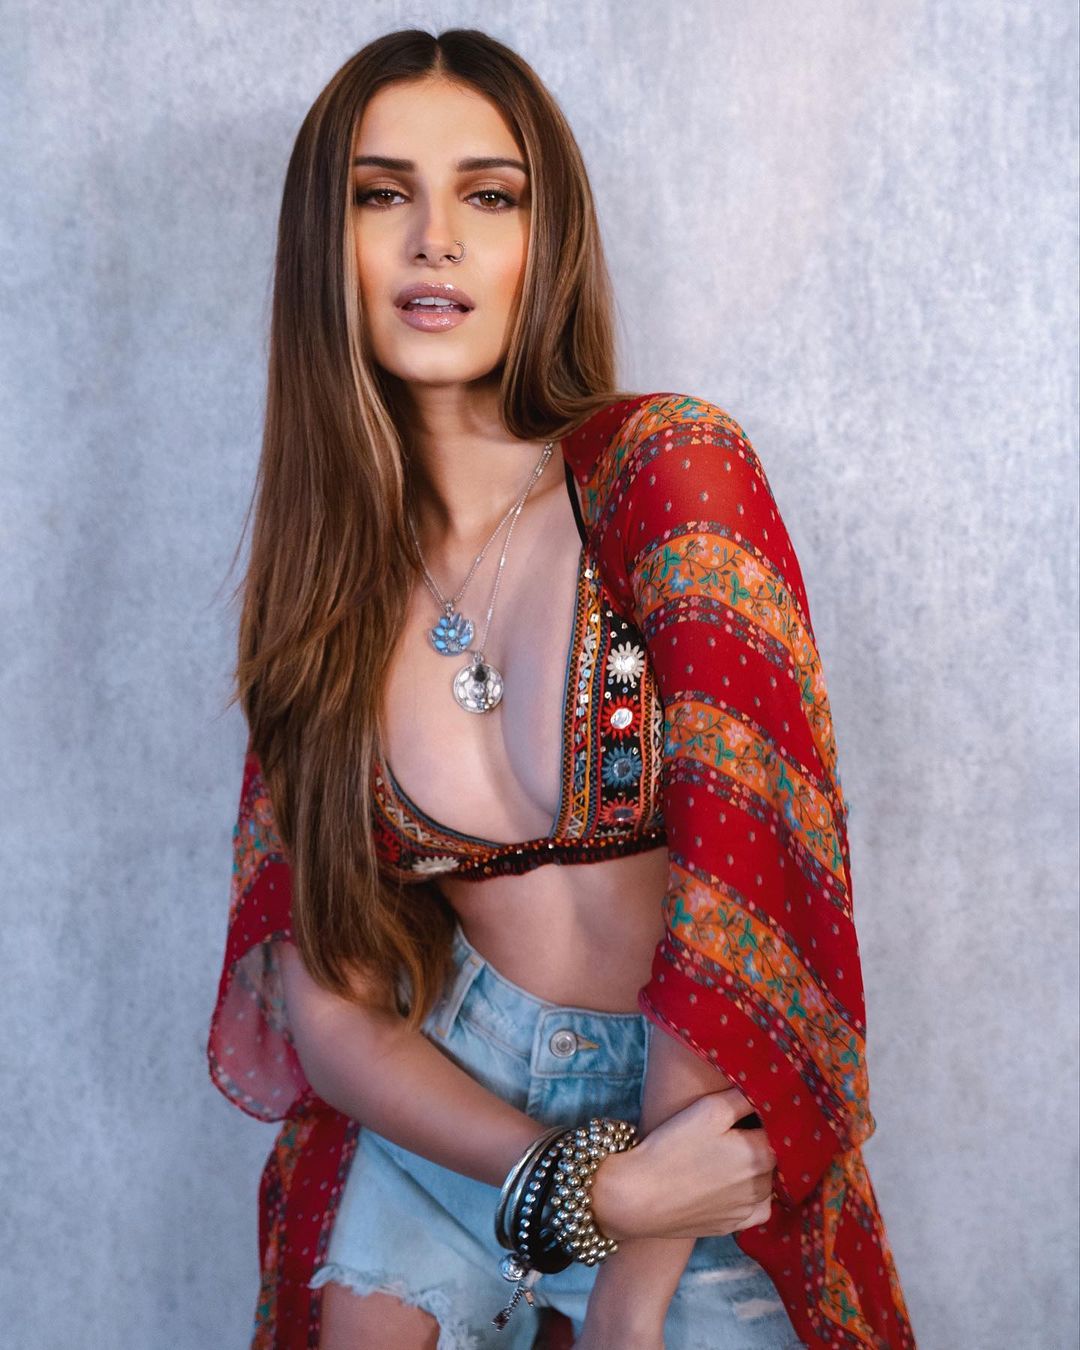 Tara Sutaria raises temperature in a boho-inspired outfit in her latest photoshoot.